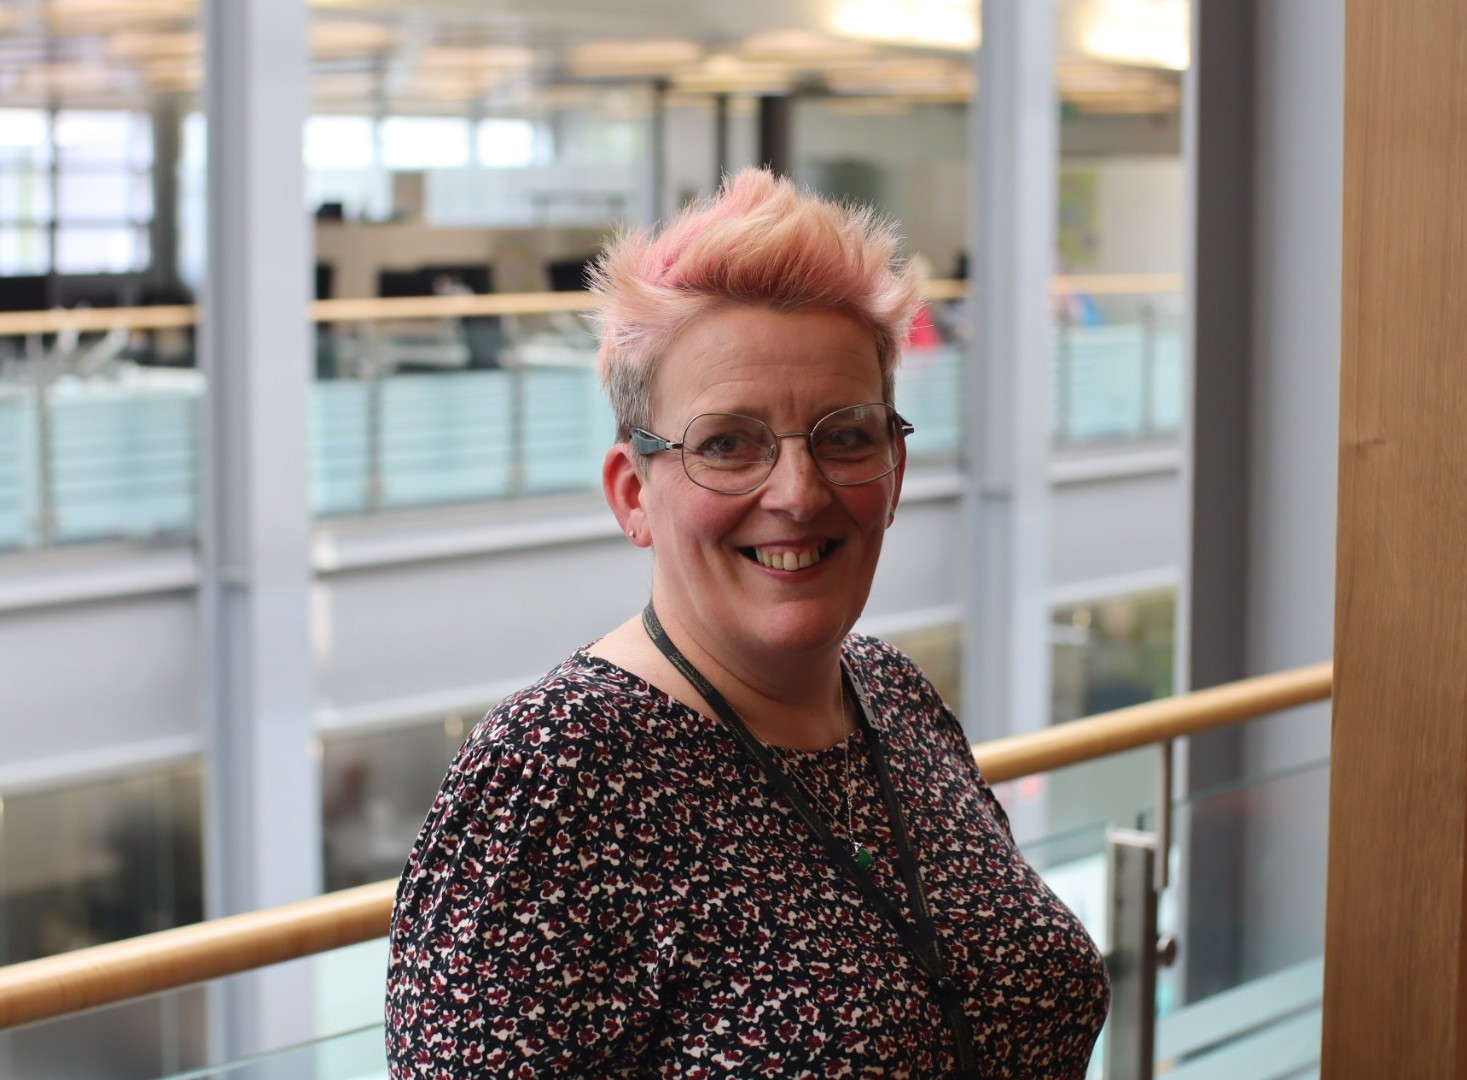 Roni, a woman with short, colourful hair and glasses, smiling towards the camera. She is standing in a large open plan office.